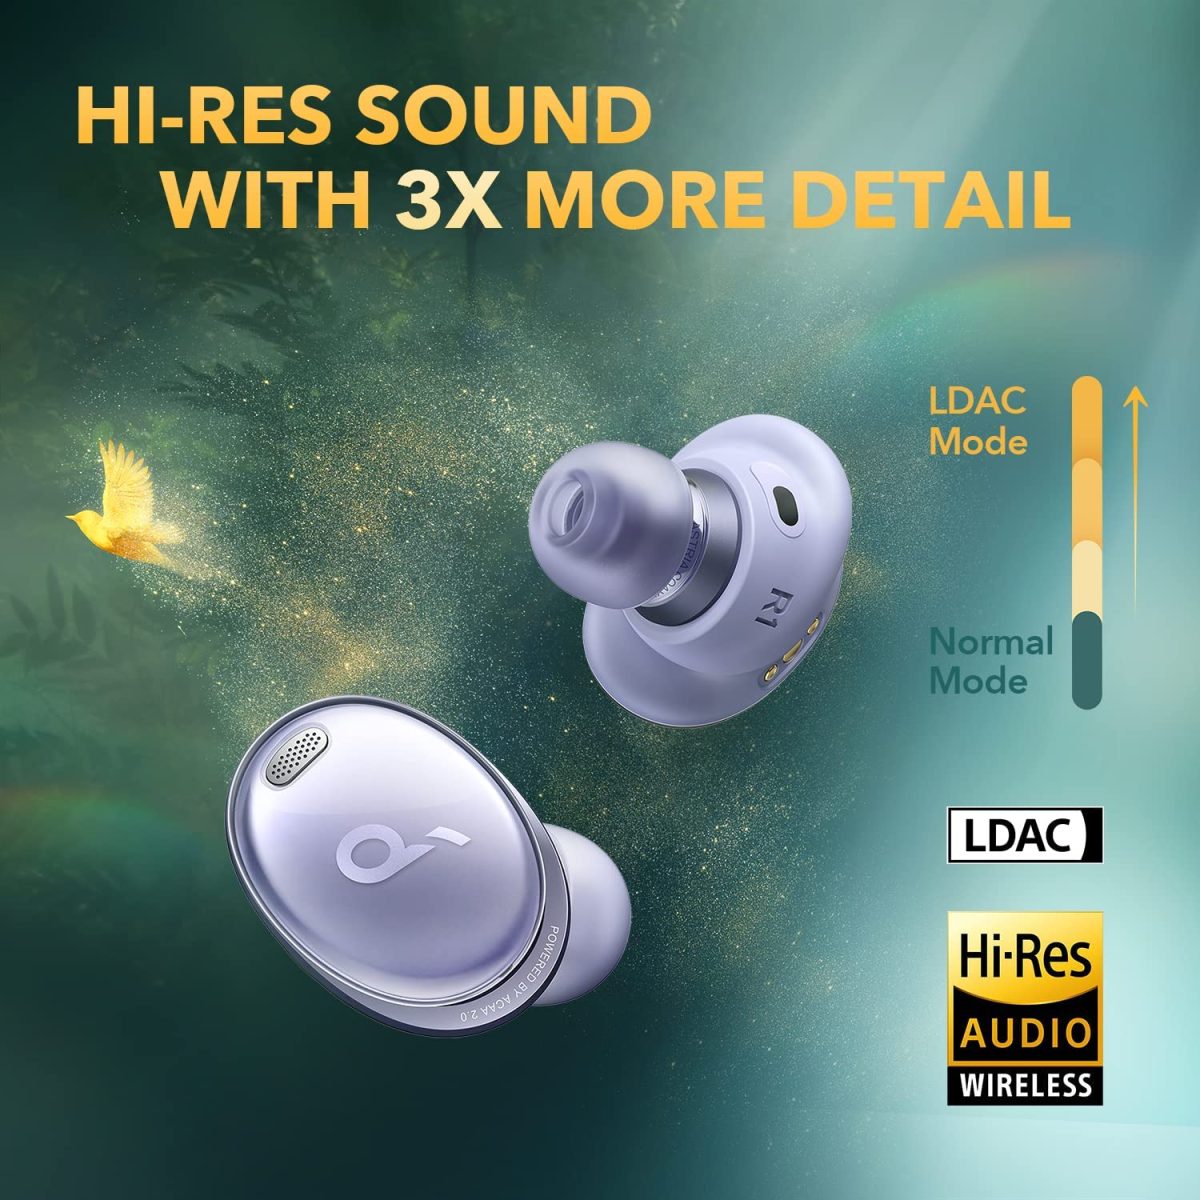 71Fgtmpliel. Ac Sl1500 Soundcore &Lt;H1 Id=&Quot;Title&Quot; Class=&Quot;A-Size-Large A-Spacing-None&Quot;&Gt;Anker Soundcore Liberty Air 3 Pro True Wireless Earbuds - Dusk Purple&Lt;/H1&Gt; Https://Www.youtube.com/Watch?V=Bguj4K07Ruy &Lt;Ul&Gt; &Lt;Li&Gt;&Lt;B&Gt;Acaa 2.0:  &Lt;/B&Gt;Our Exclusive Coaxial Dual Driver Technology Delivers High And Low Frequency Sound Directly To Your Ear Without Interference. Its Wide Soundstage Is Detailed And Spacious, Bass Has A Deep Punch, Mids Are Luscious, And Treble Sparkles.&Lt;/Li&Gt; &Lt;Li&Gt;&Lt;B&Gt;Personalized Noise Cancelling:  &Lt;/B&Gt;Standard Noise Cancelling Only Adjusts Noise Based On Data. Hearid Anc Analyzes Your Ears And Level Of In-Ear Pressure To Create A Tailored Profile That Optimizes Noise Reduction And Reduces External Sound To Suit Your Ears.&Lt;/Li&Gt; &Lt;Li&Gt;&Lt;B&Gt;Fusion Comfort Fit:  &Lt;/B&Gt;Liberty 3 Pro’s Earbuds Have A Triple-Point Ergonomic Shape And Built-In Ear Pressure Relief For All-Day Comfort. 4 Sizes Of Liquid Silicone Ear Tips And Flexible Ear Wings Ensure You Get A Strong Seal And Secure Grip.&Lt;/Li&Gt; &Lt;Li&Gt;&Lt;B&Gt;Up To 32 Hours Of Playtime:  &Lt;/B&Gt;Enjoy Up To 8 Hours Of Music From A Single Charge, Plus Get 3 Full Charges From The Compact Charging Case To Extend The Playtime Even Further. Recharge The Case Via Usb-C Cable Or Wireless Charger.&Lt;/Li&Gt; &Lt;/Ul&Gt; &Lt;Pre&Gt;Warranty: Anker Product Warranty&Lt;/Pre&Gt; &Lt;Pre&Gt;&Lt;B&Gt;We Also Provide International Wholesale And Retail Shipping To All Gcc Countries: Saudi Arabia, Qatar, Oman, Kuwait, Bahrain.&Lt;/B&Gt;&Lt;/Pre&Gt; Earbuds Anker Soundcore Liberty Air 3 Pro True Wireless Earbuds - Dusk Purple